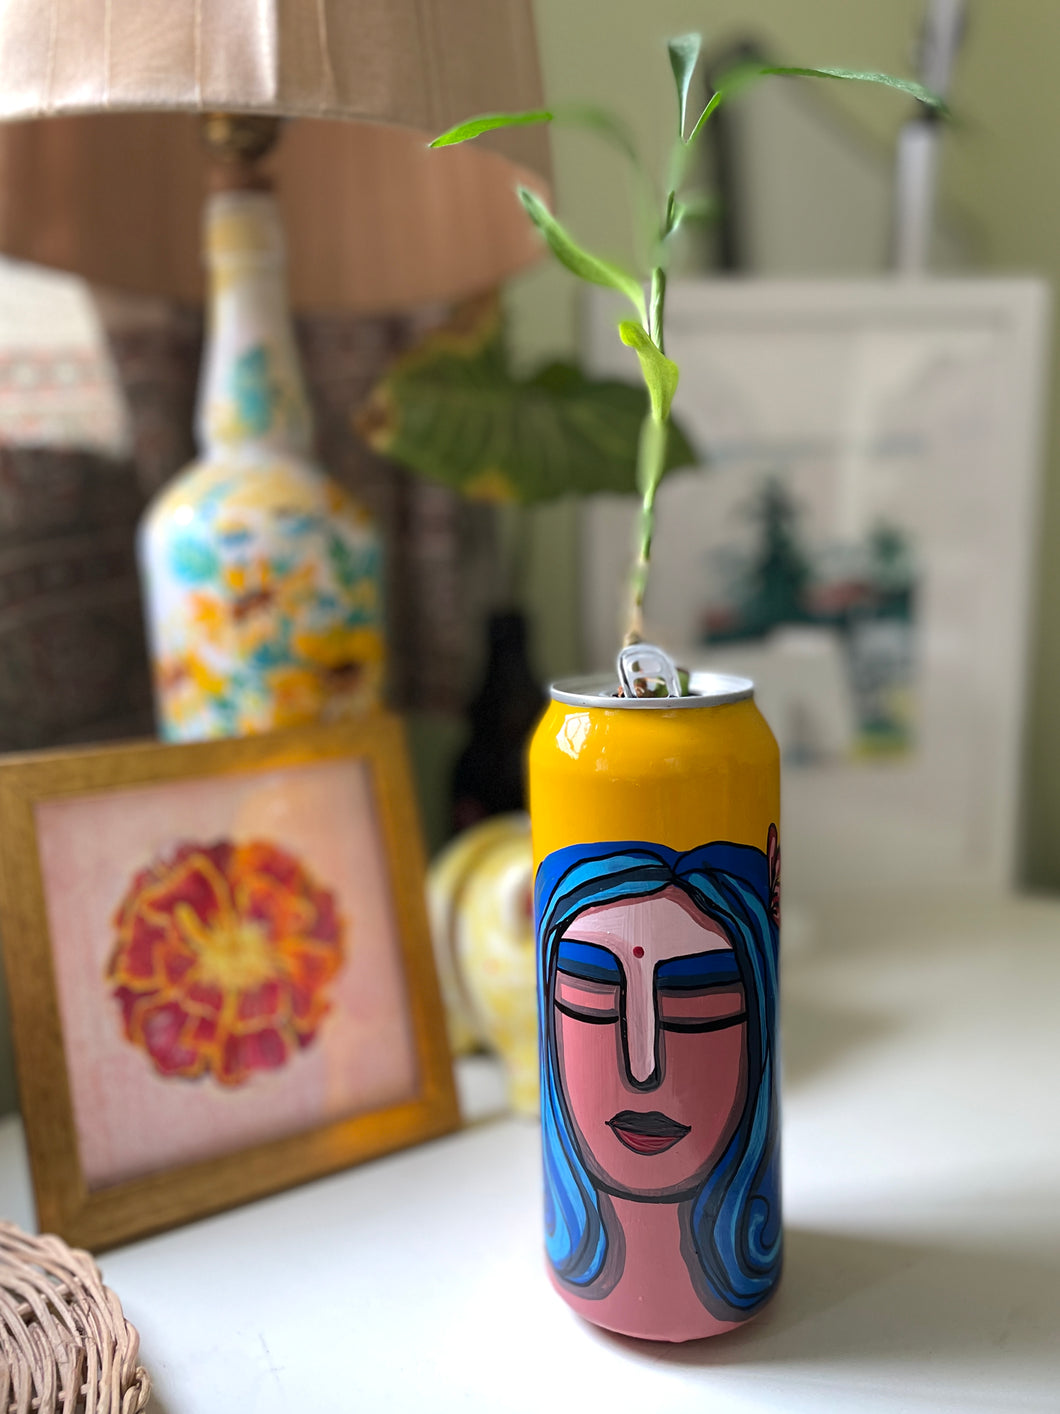 The Blue hair girl - can planter